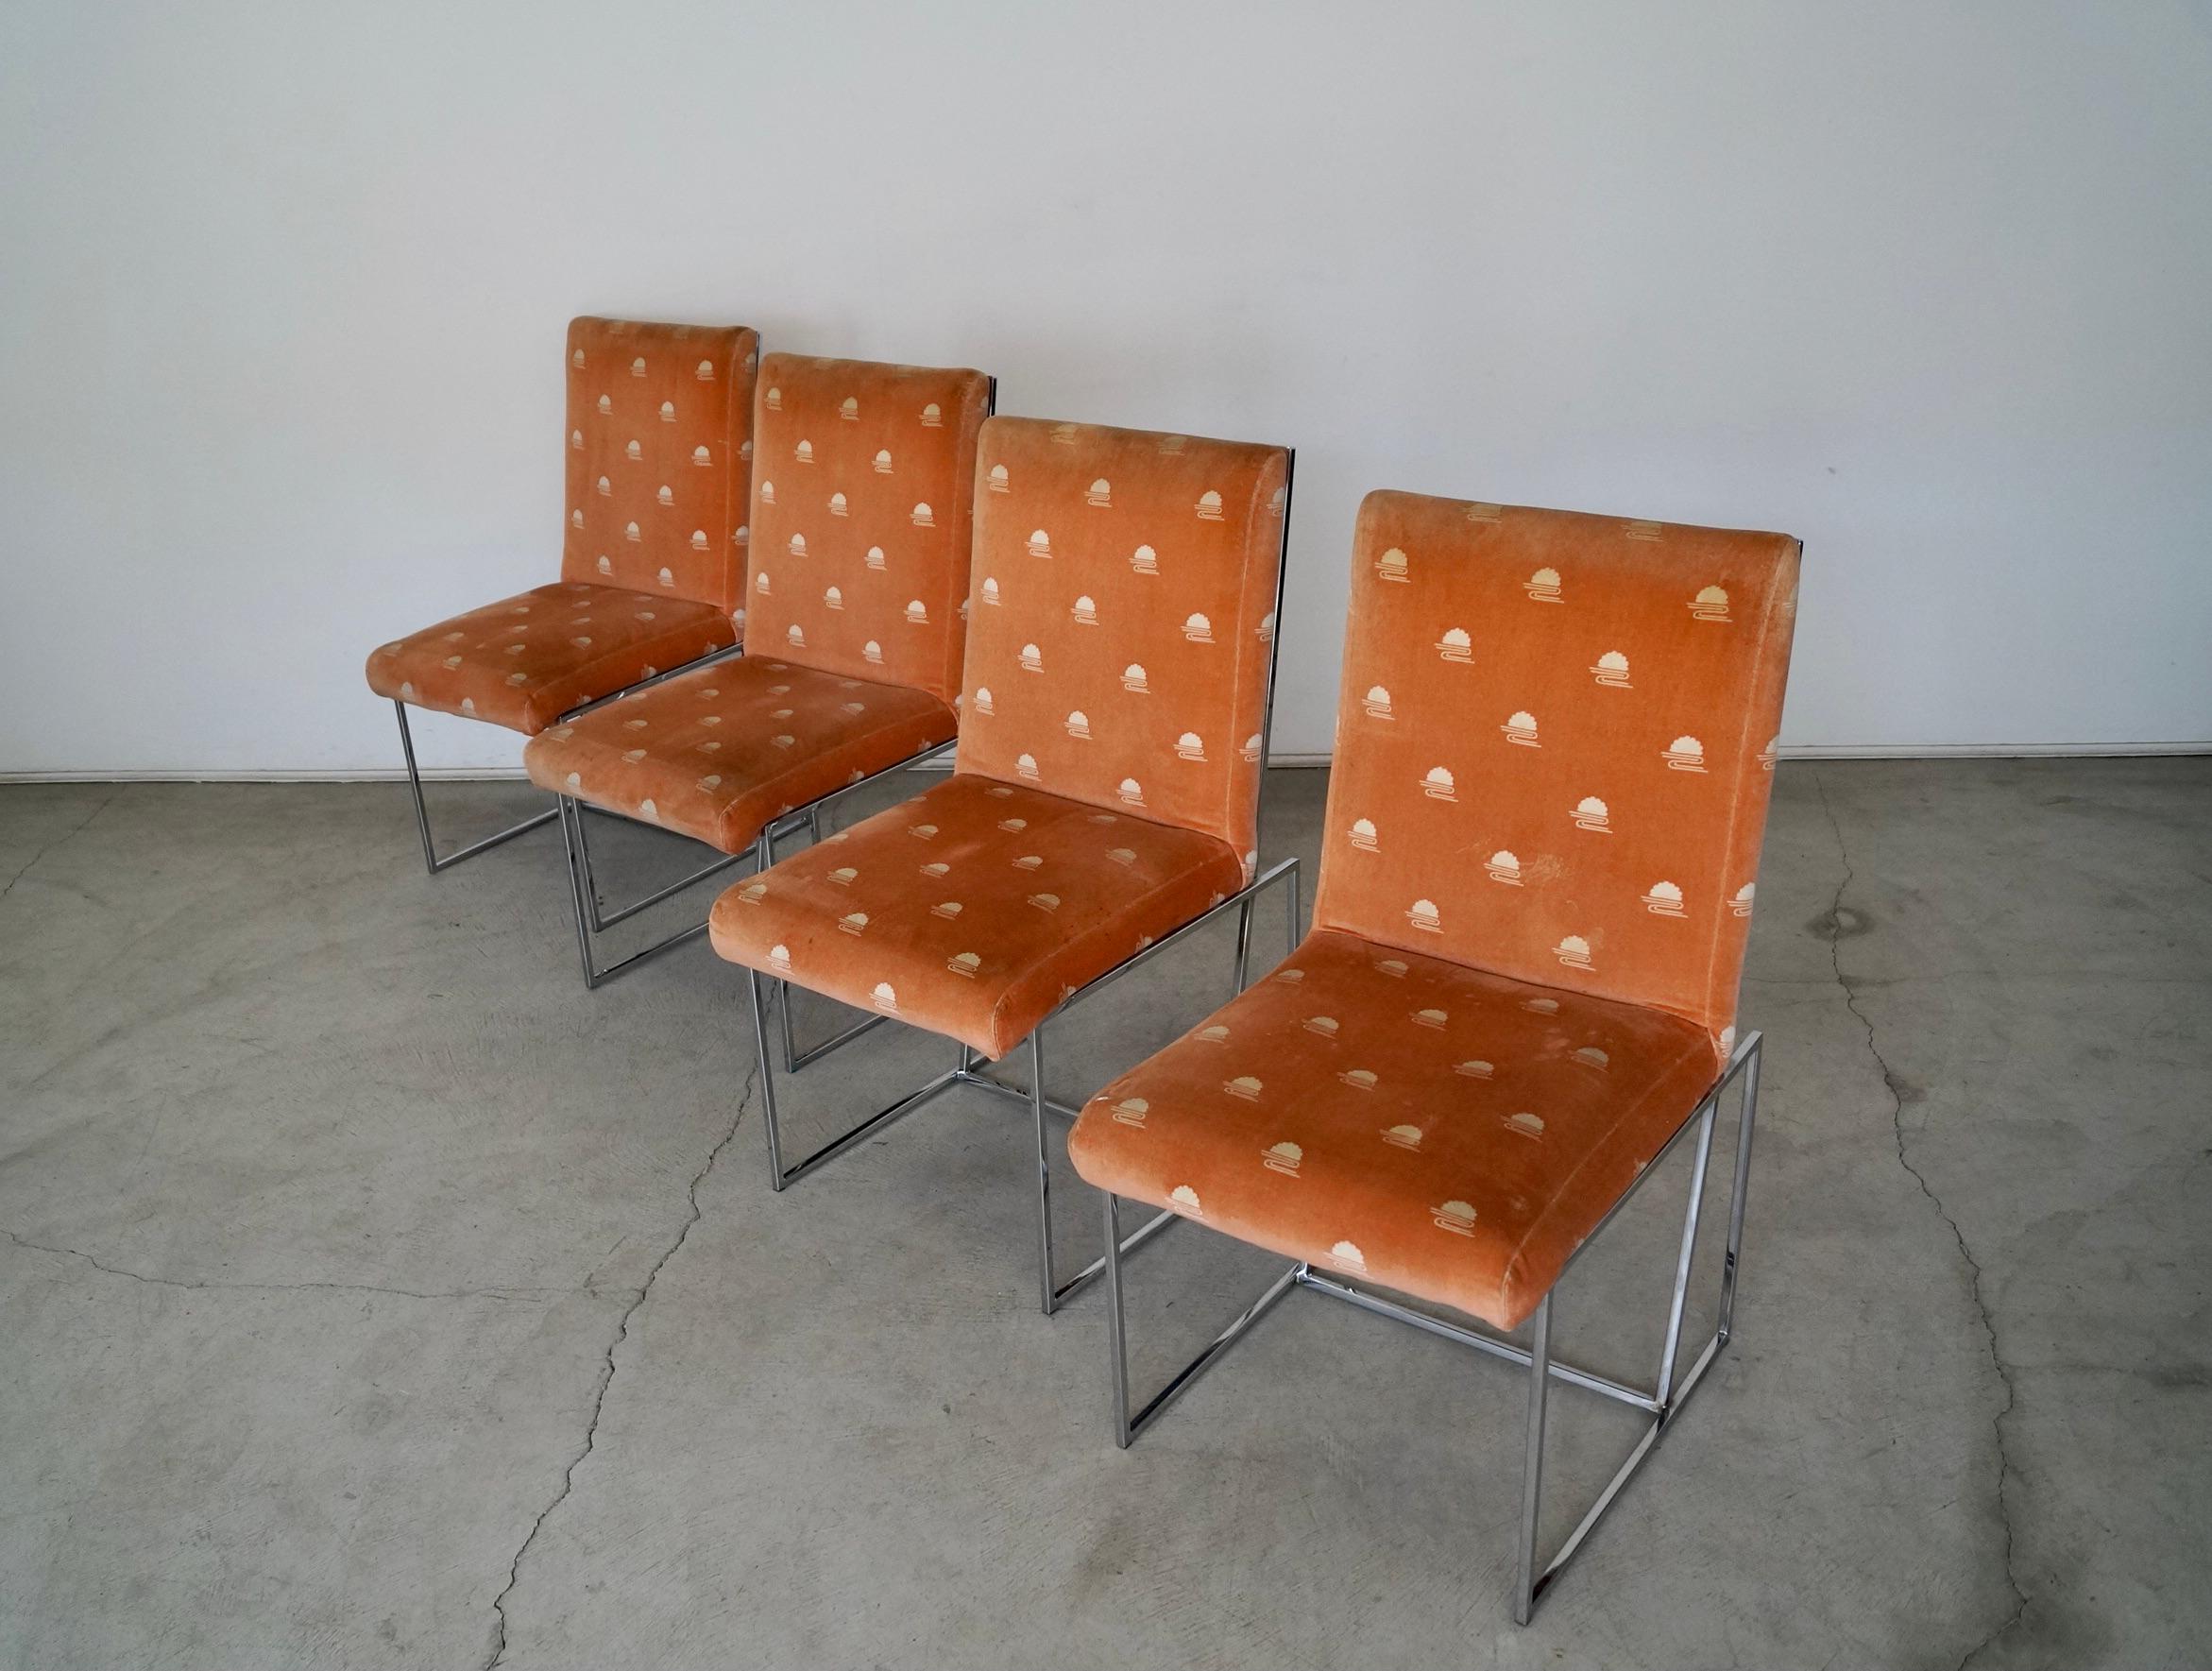 Vintage Mid-Century Modern dining chairs for sale. From the 1970's, and have an incredible design. They have a chrome frame with the original coral fabric with vintage pattern. The original fabric is worn and needs to be reupholstered in a new fresh